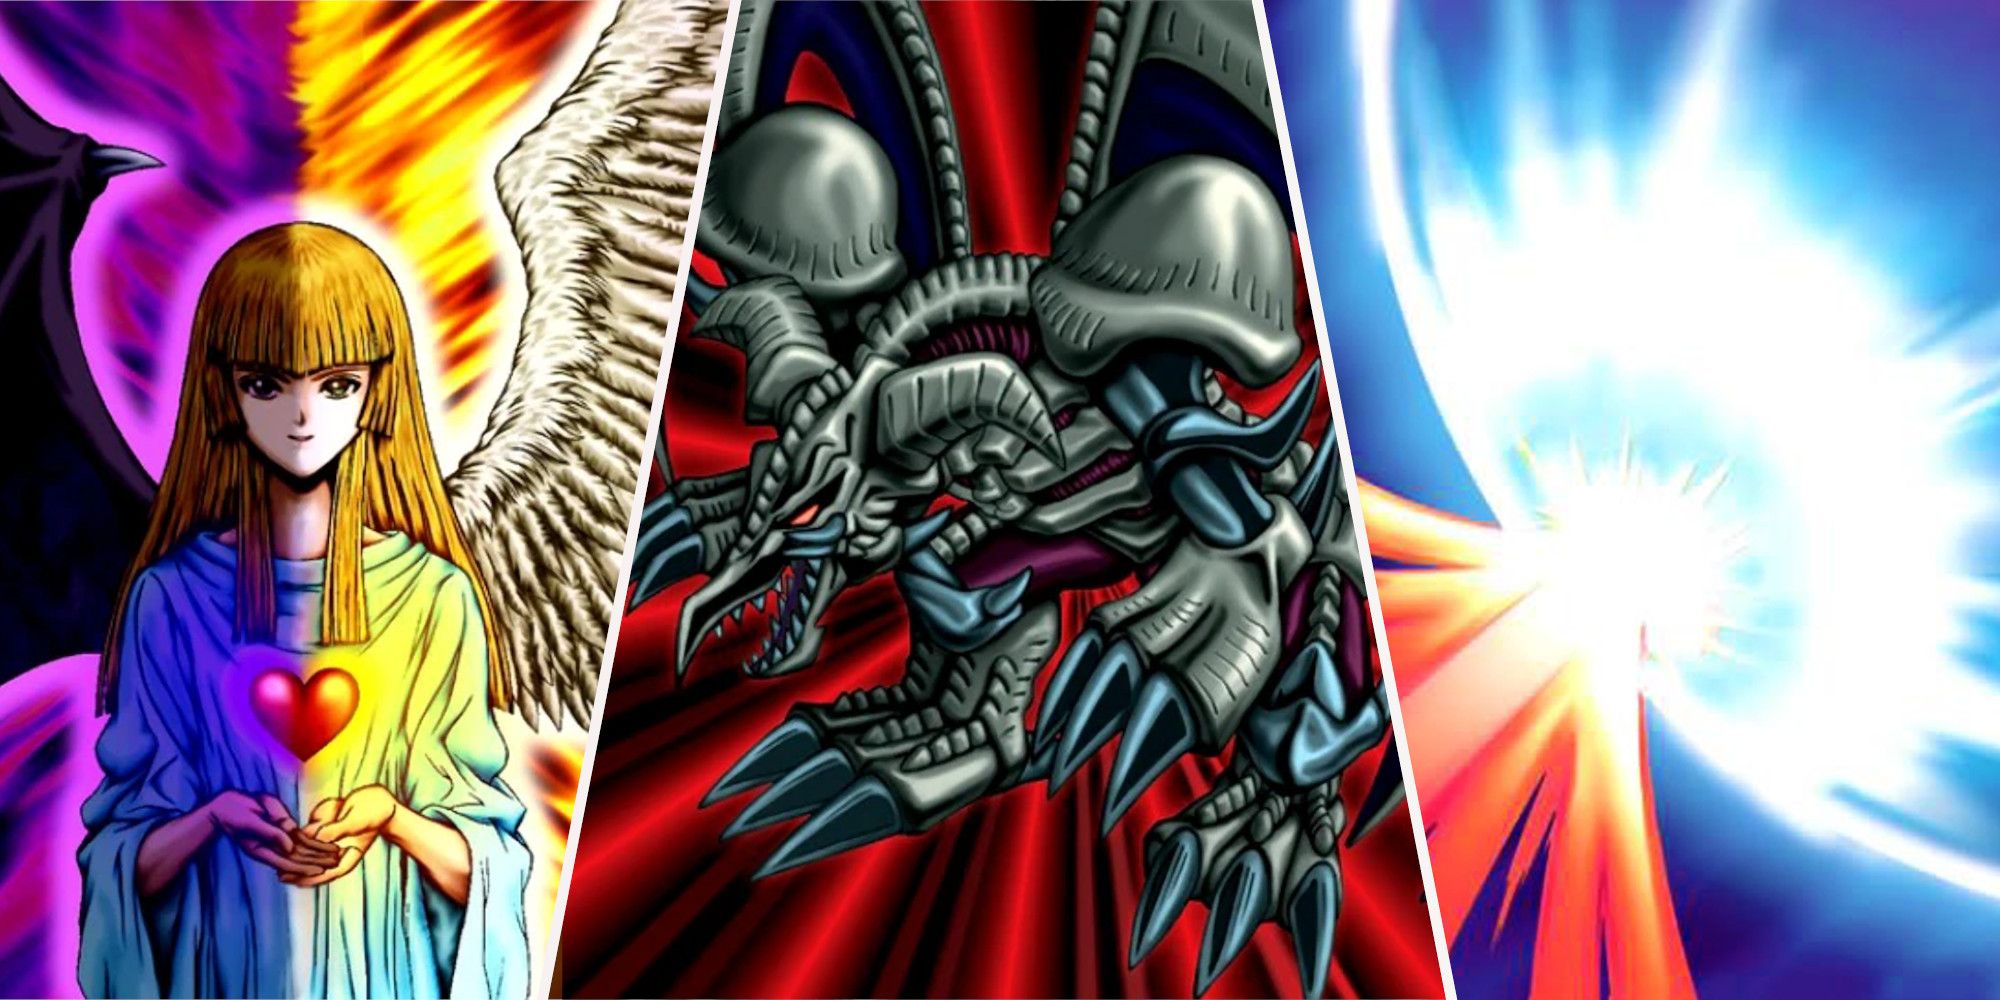 Change Of Heart, Black Skull Dragon, and Mirror Force Card Art from YuGiOh